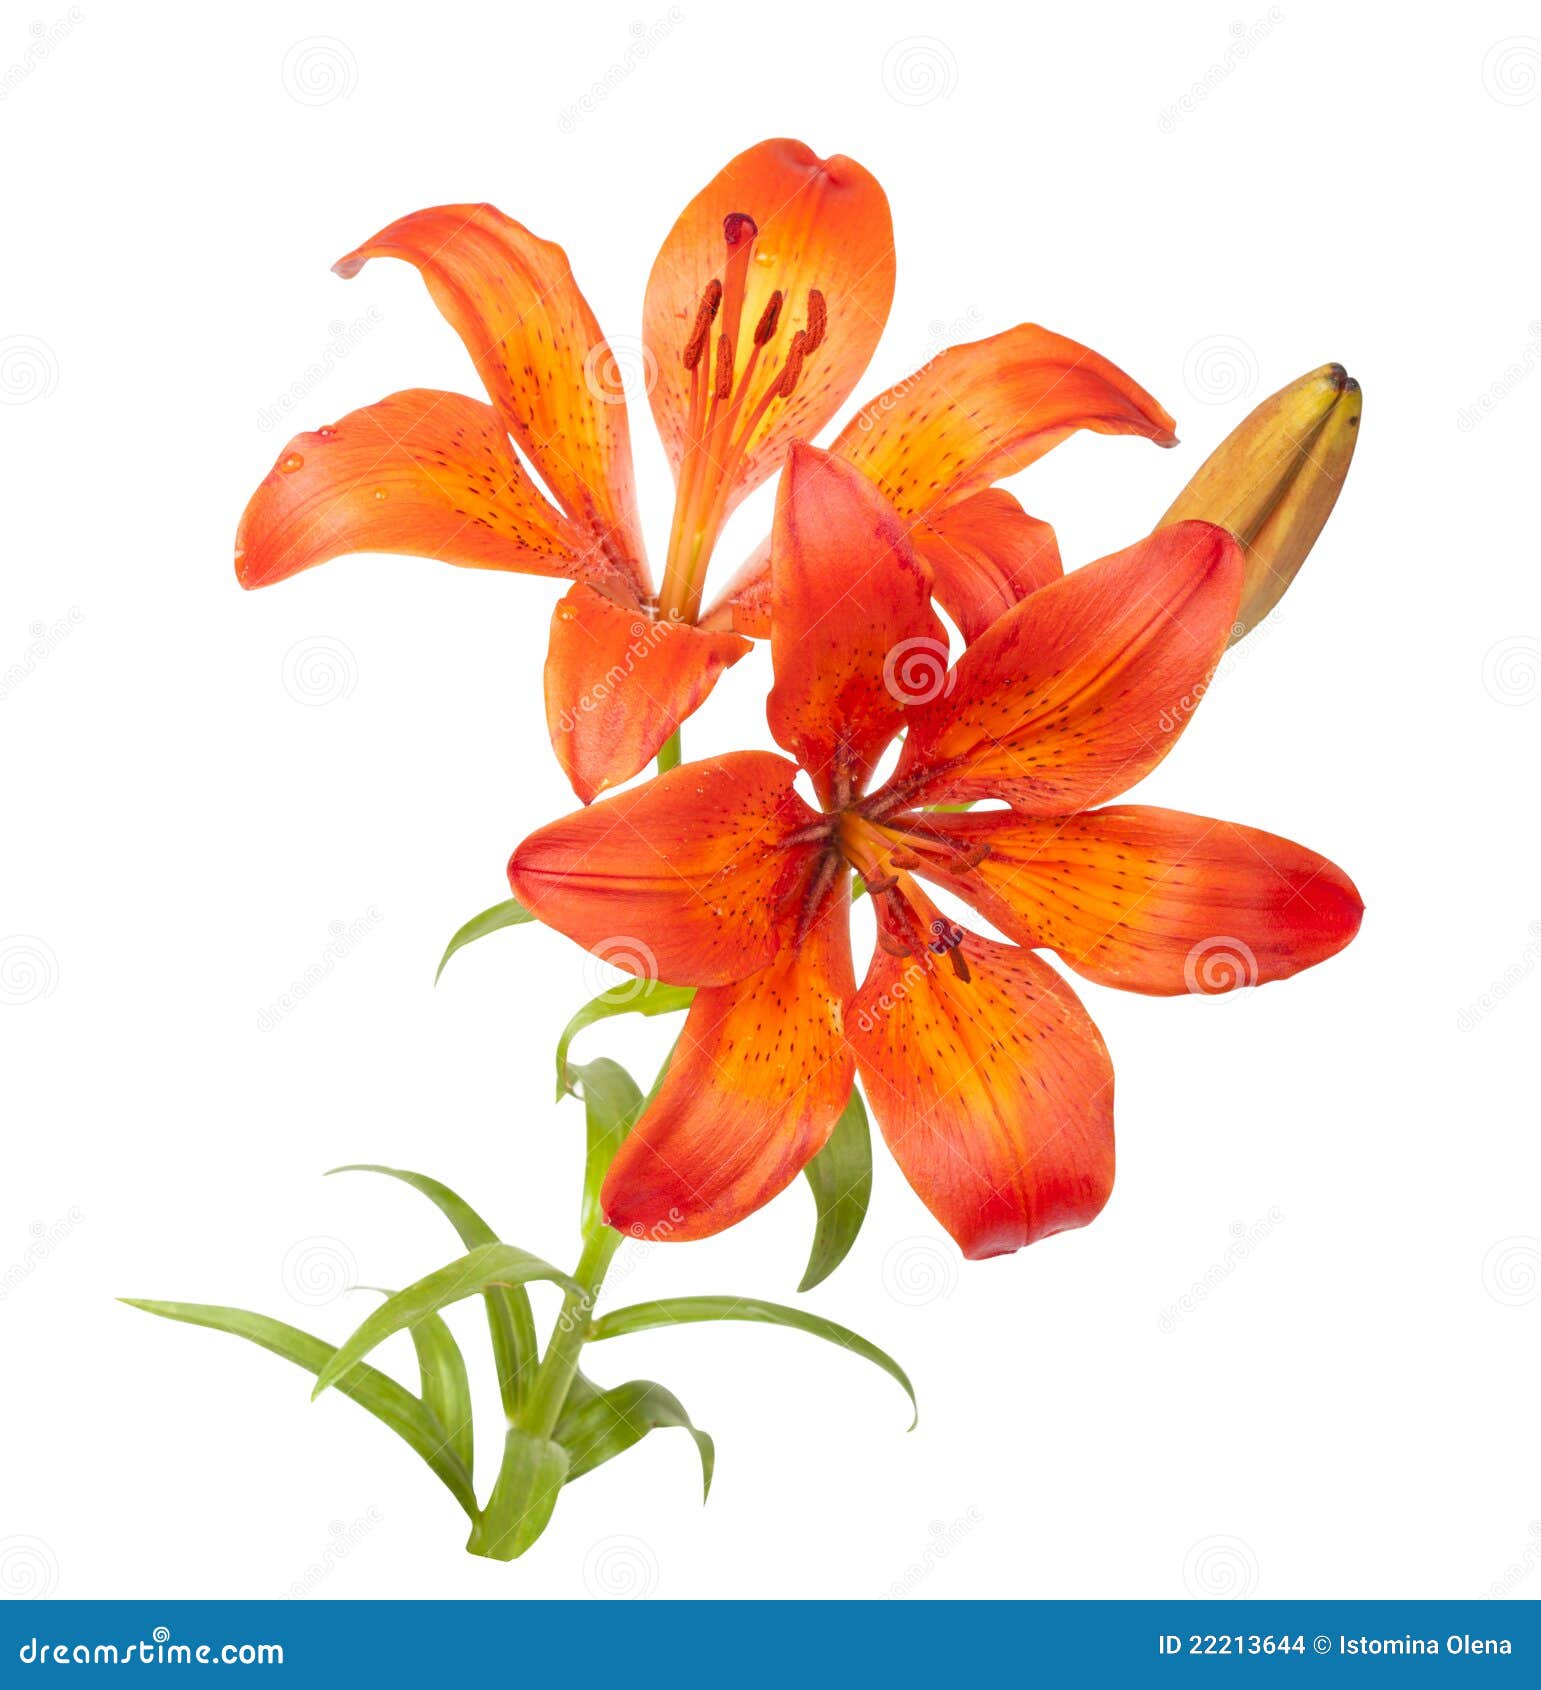 tiger lily clipart - photo #5